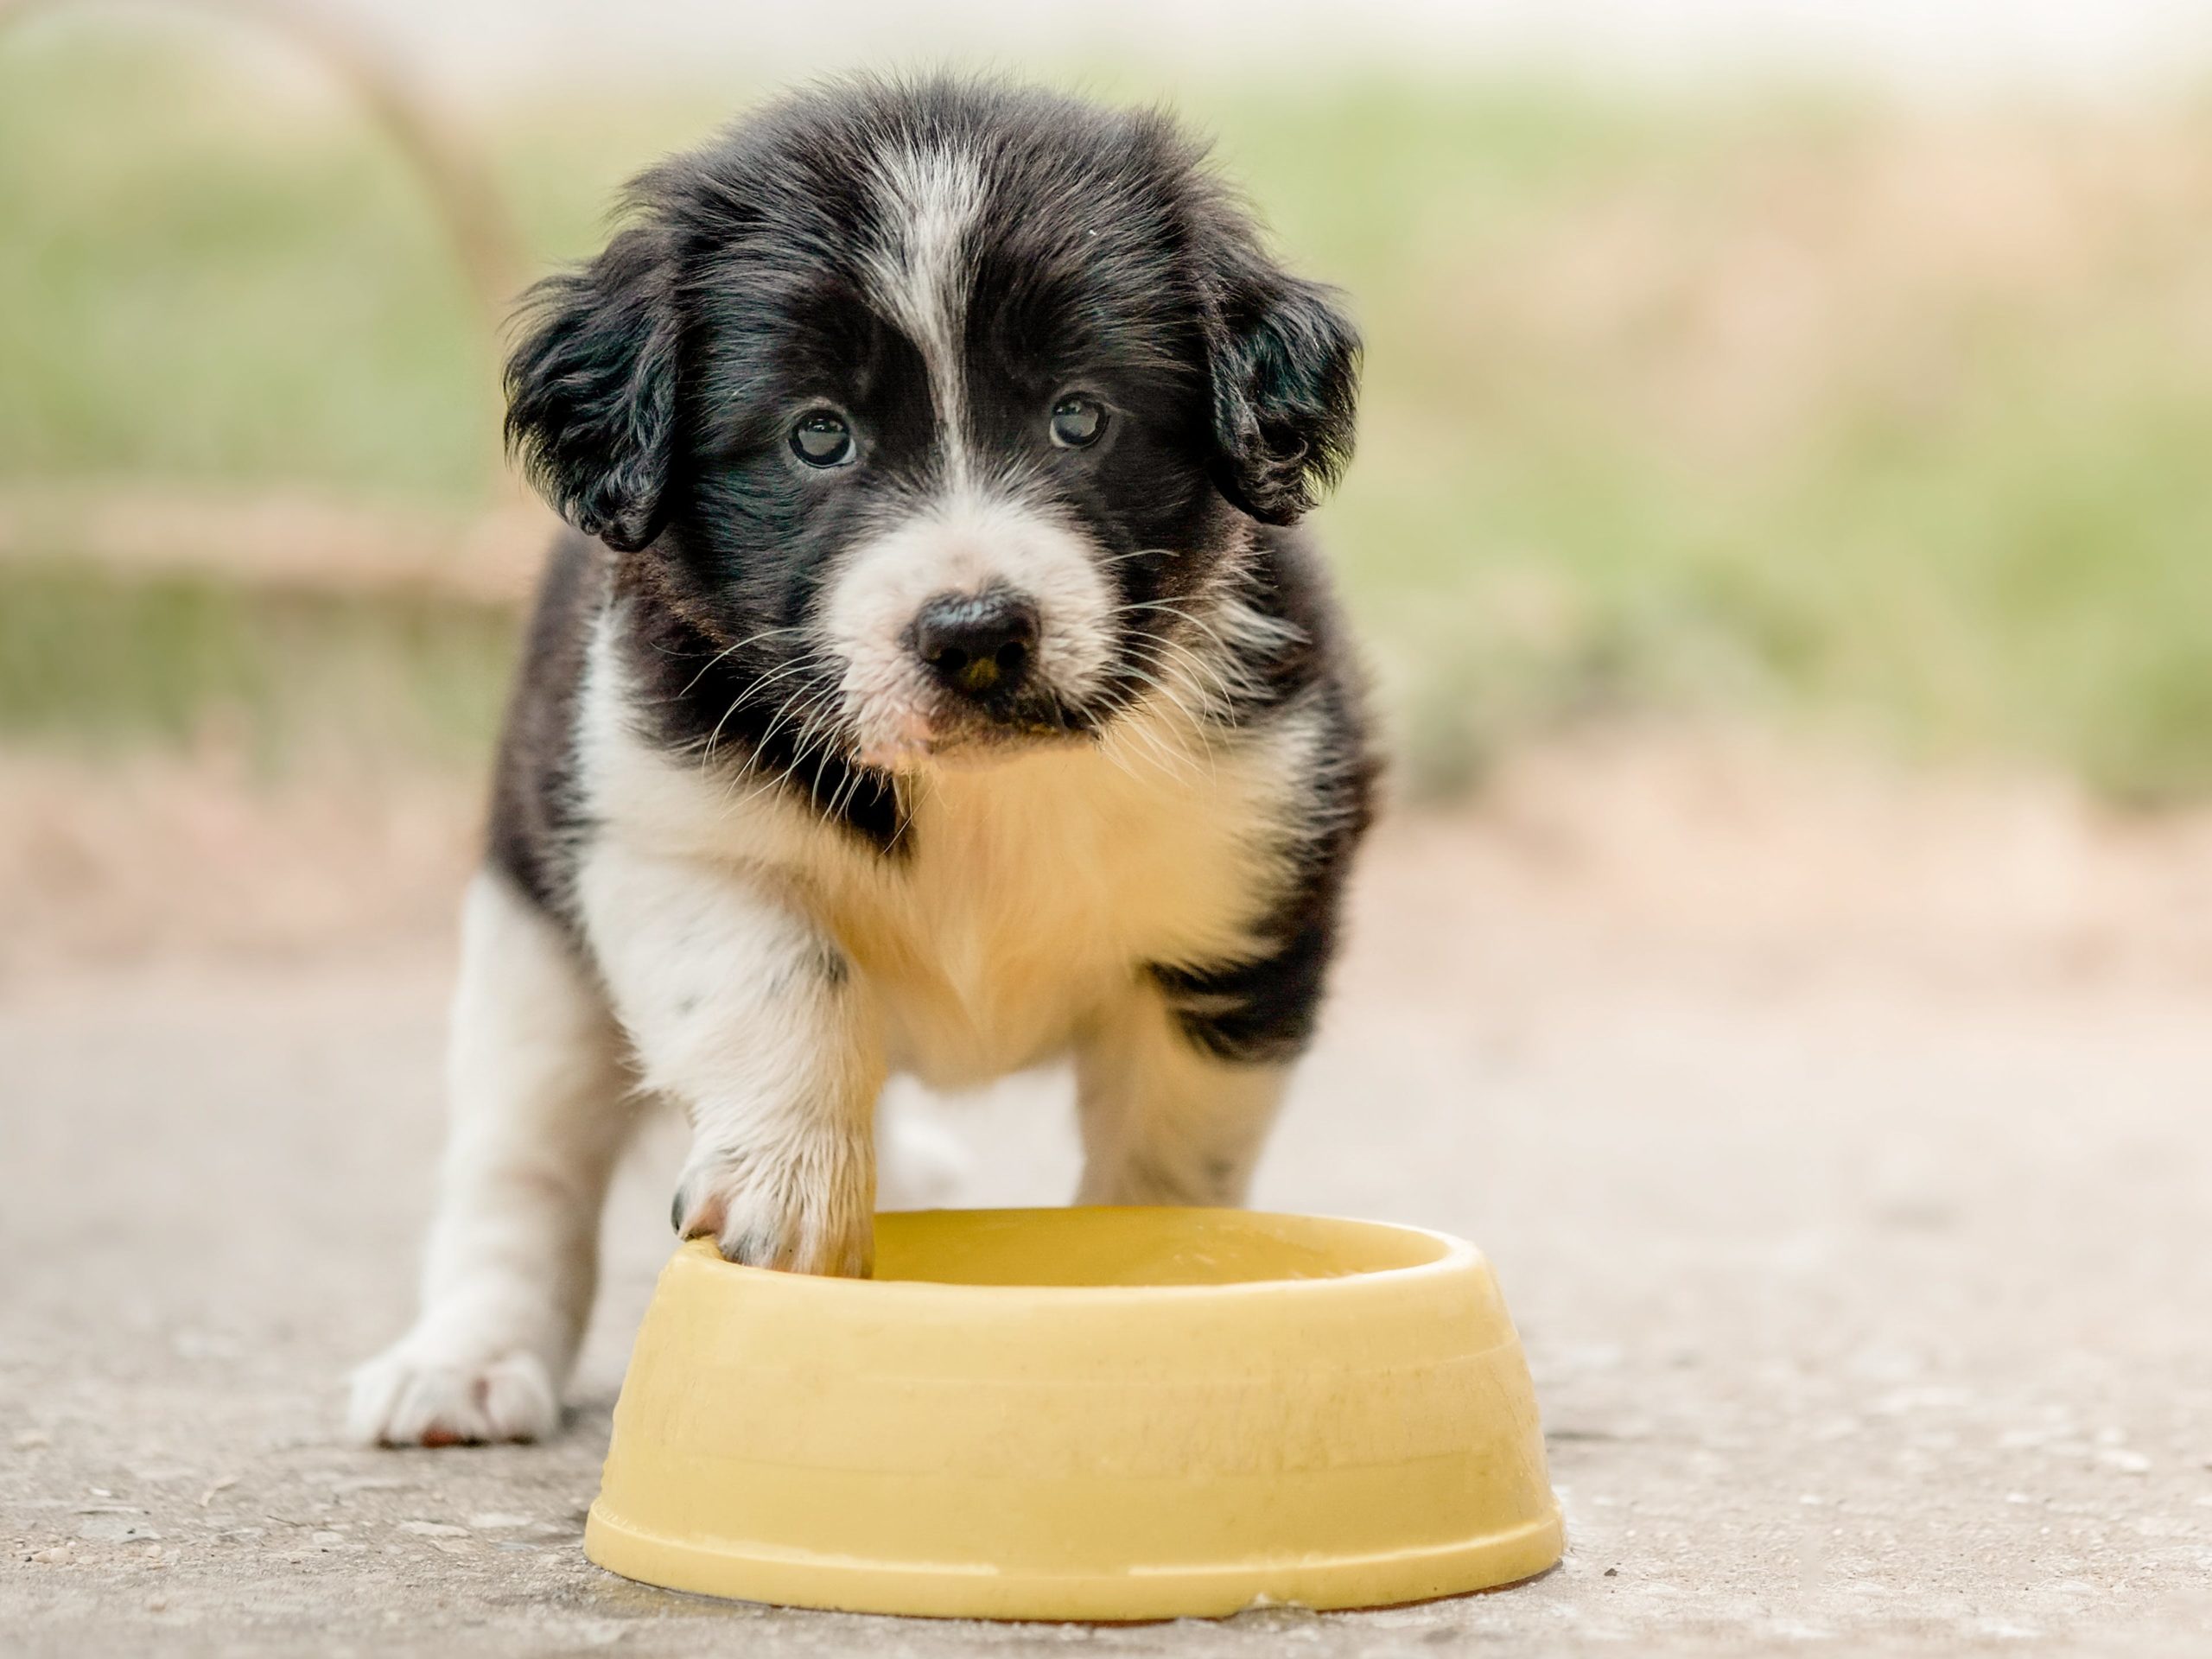 pqcb1 puppy standing outdoors next to a feeding bowl scaled